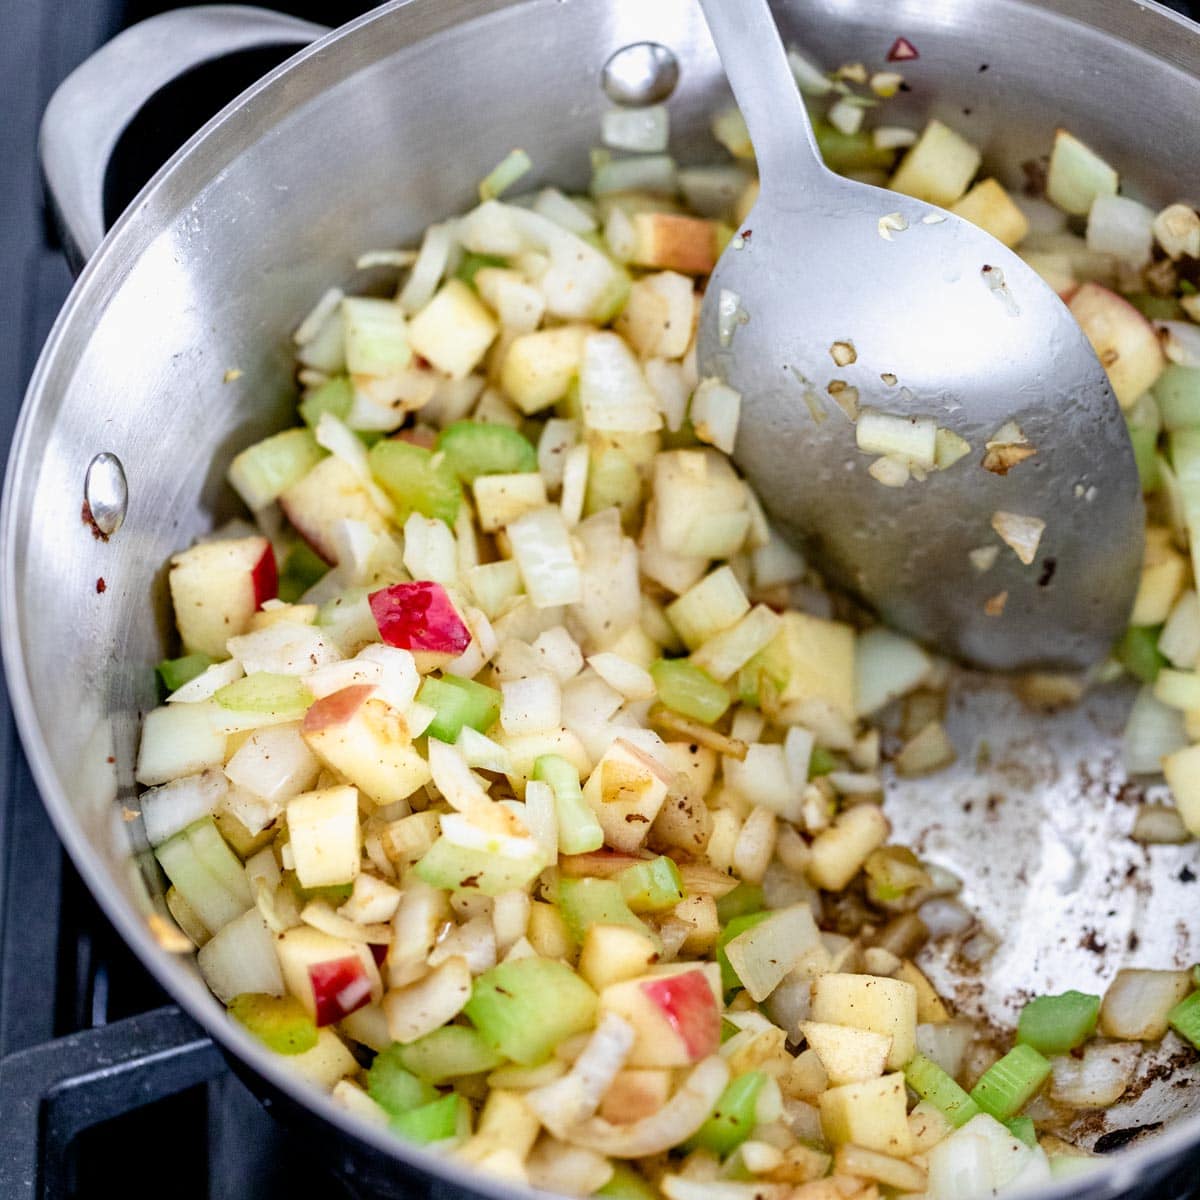 Apples, celery onion and garlic cooking for Mussels recipe.